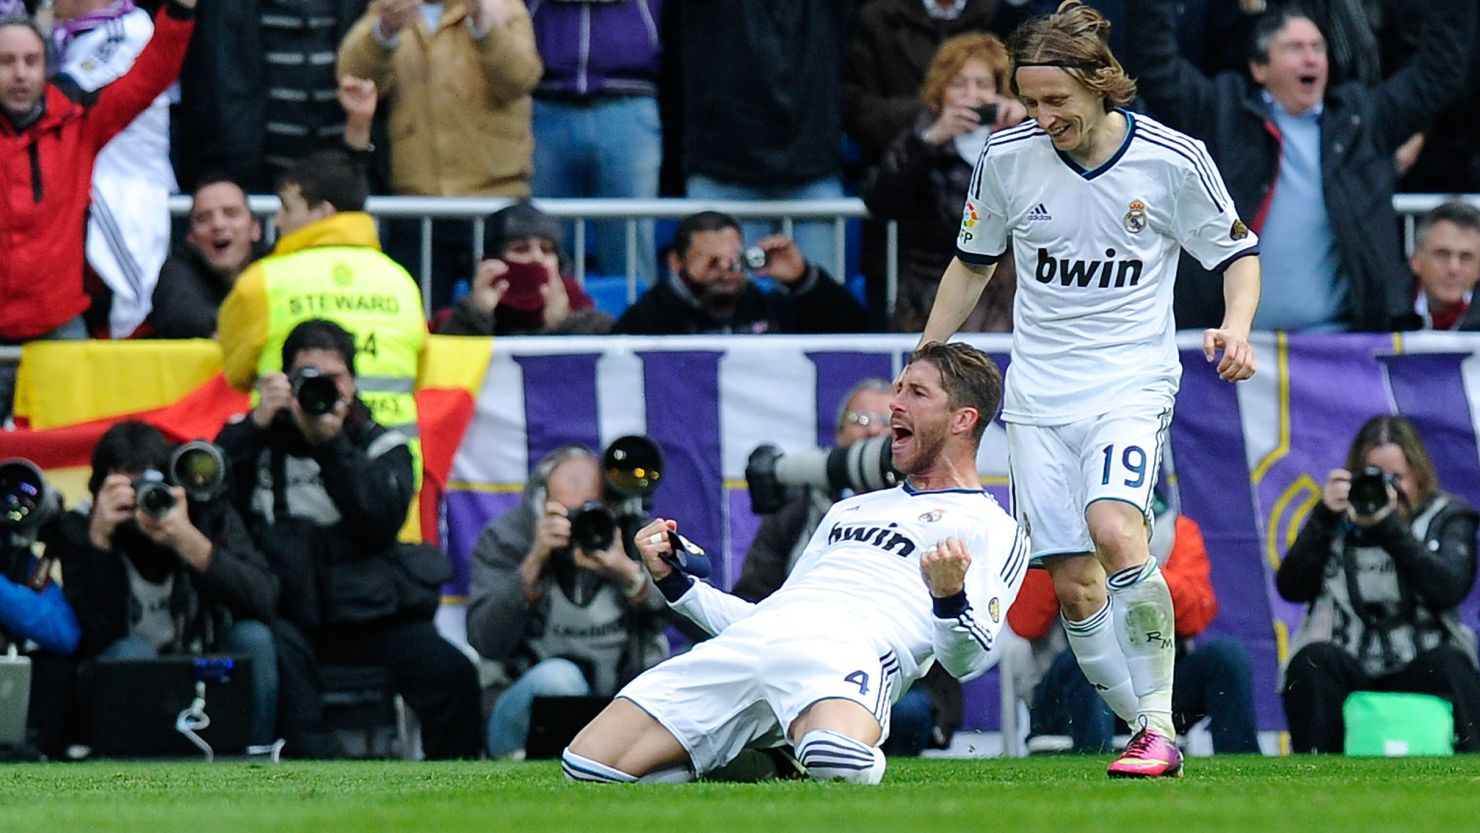 Sergio Ramos (left) celebrates with Luka Modric after scoring Real Madrid's second goal against Barcelona on Saturday.